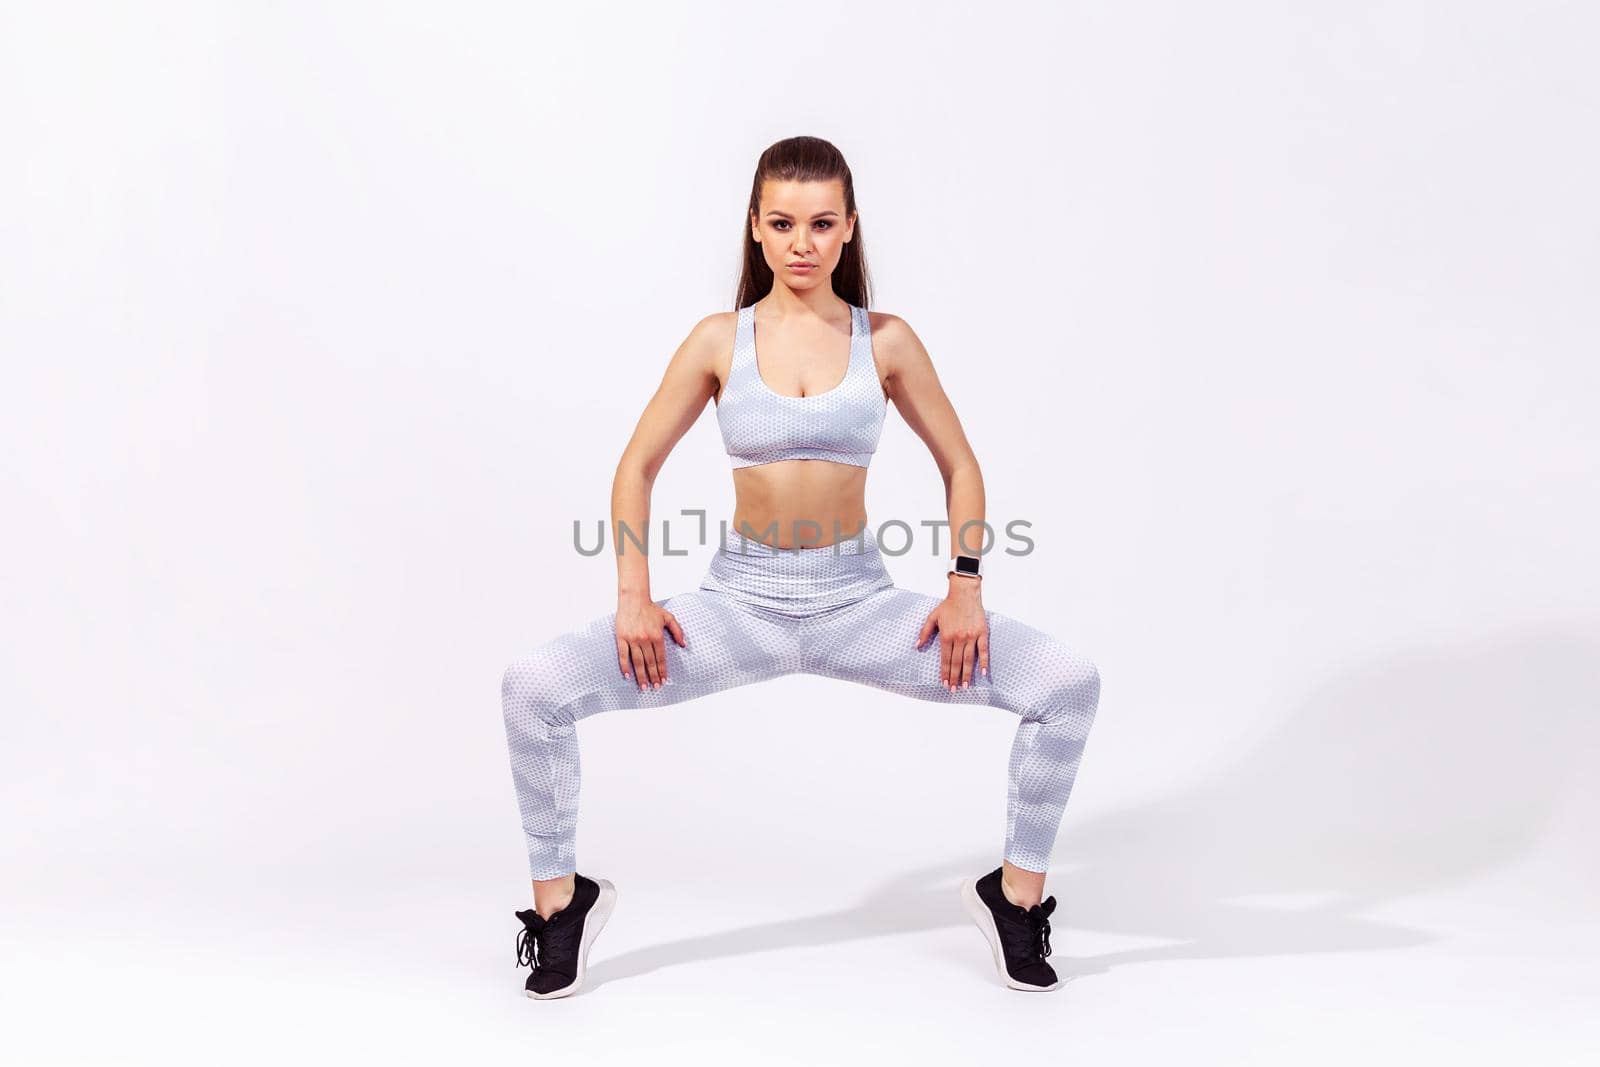 Full length assertive woman in white sportswear squatting and spreading legs to stretch muscles, warming up before twine exercise, training flexibility. Indoor studio shot isolated on gray background